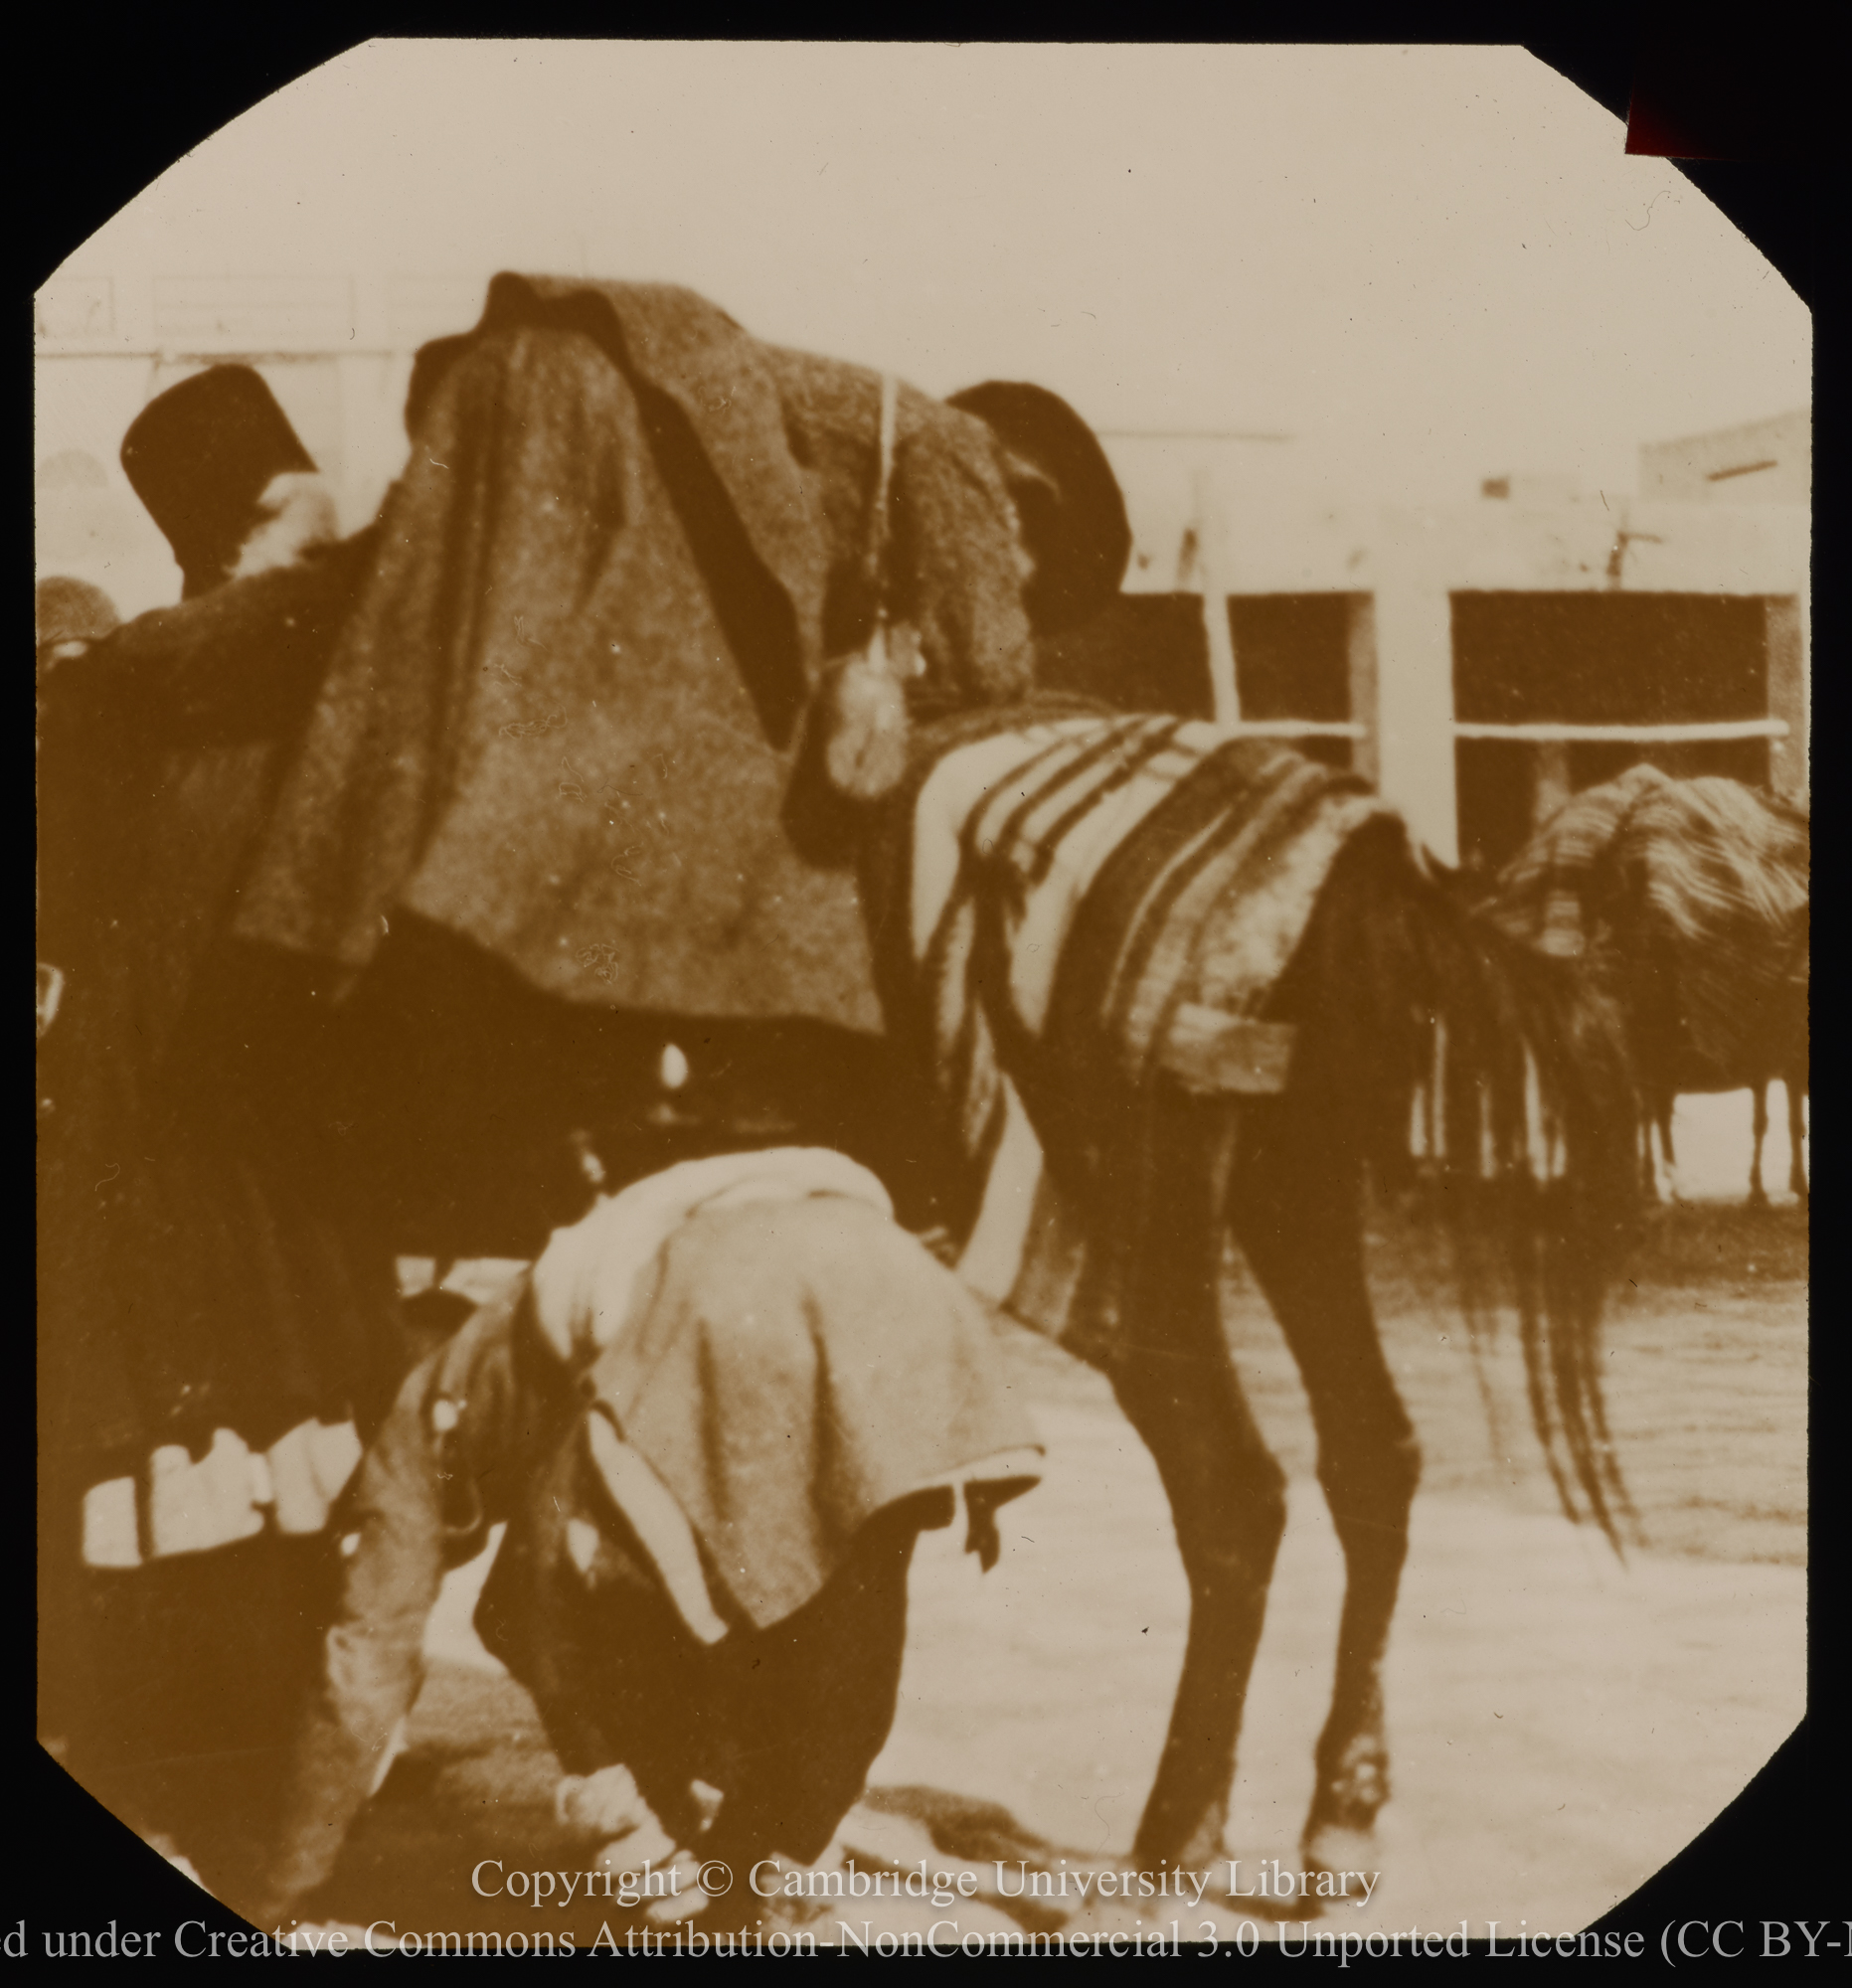 Missionary mounting a mule, 1928 - 1935